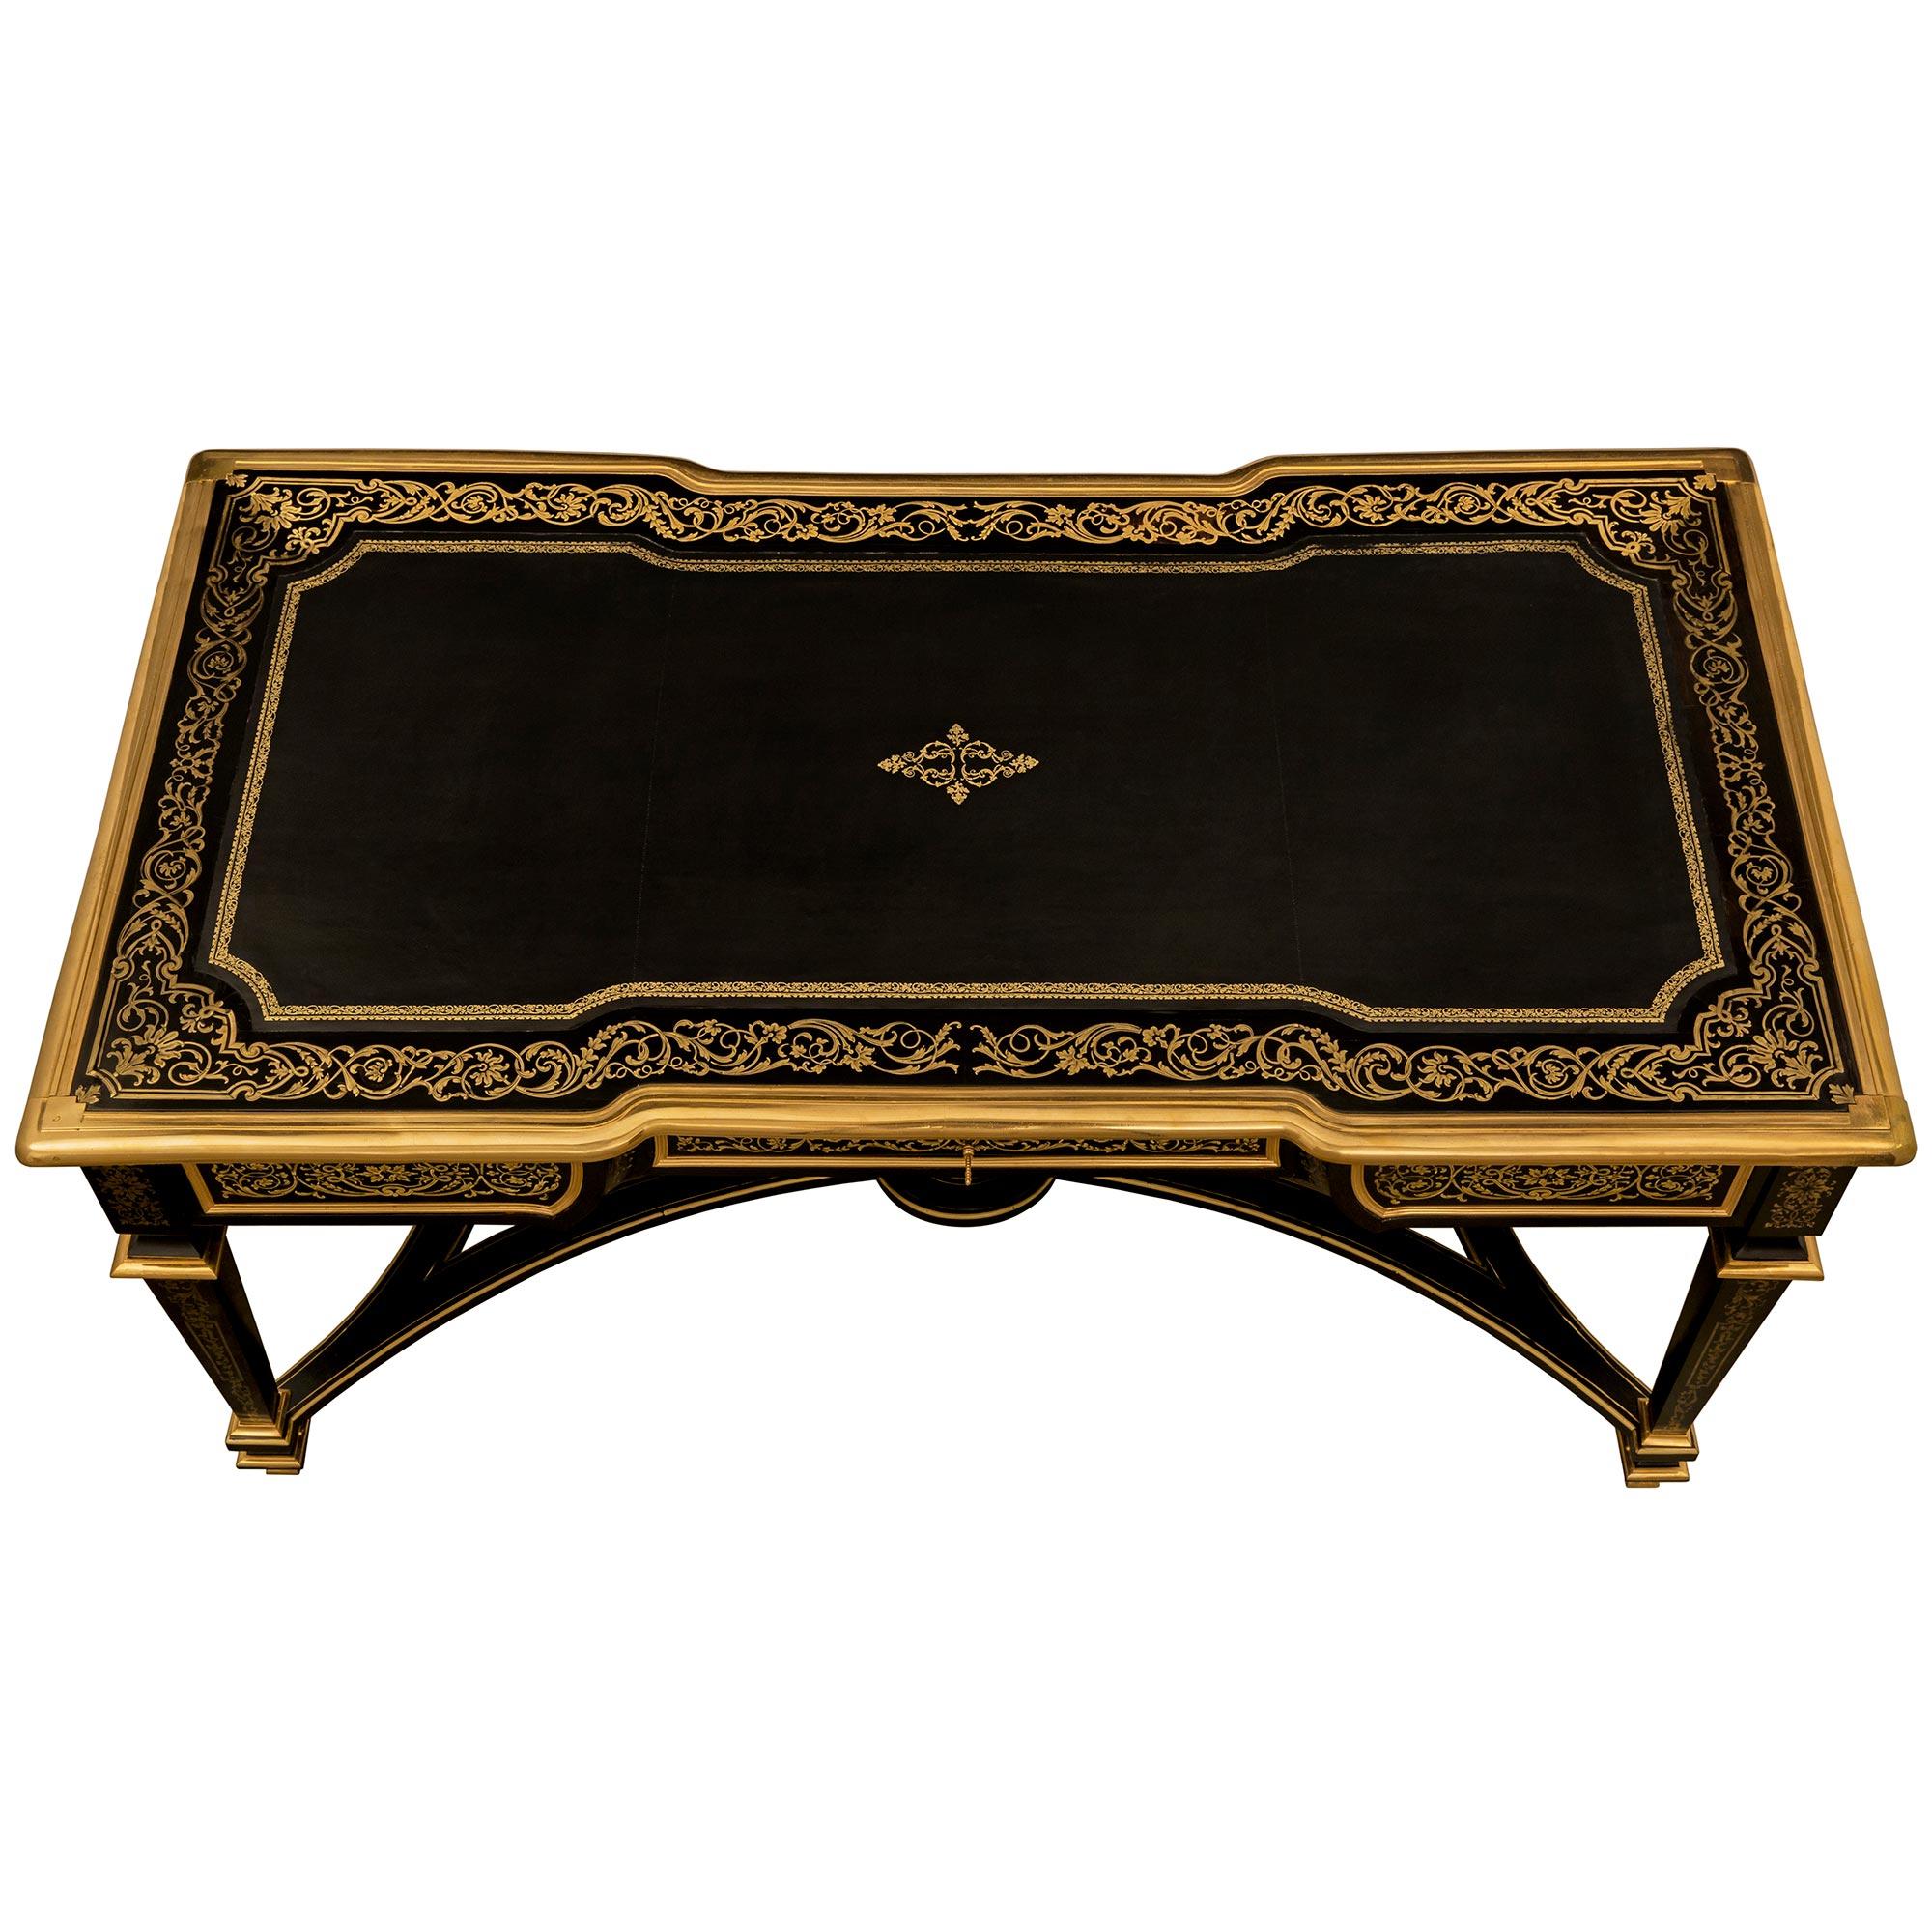 A handsome and richly detailed French 19th century Louis XIV st. Ebony, Brass and Ormolu Boulle desk. This wonderful rectangular desk is raised by four square tapered legs decorated by a mottled Ormolu band and bottom topie shaped feet. The legs are